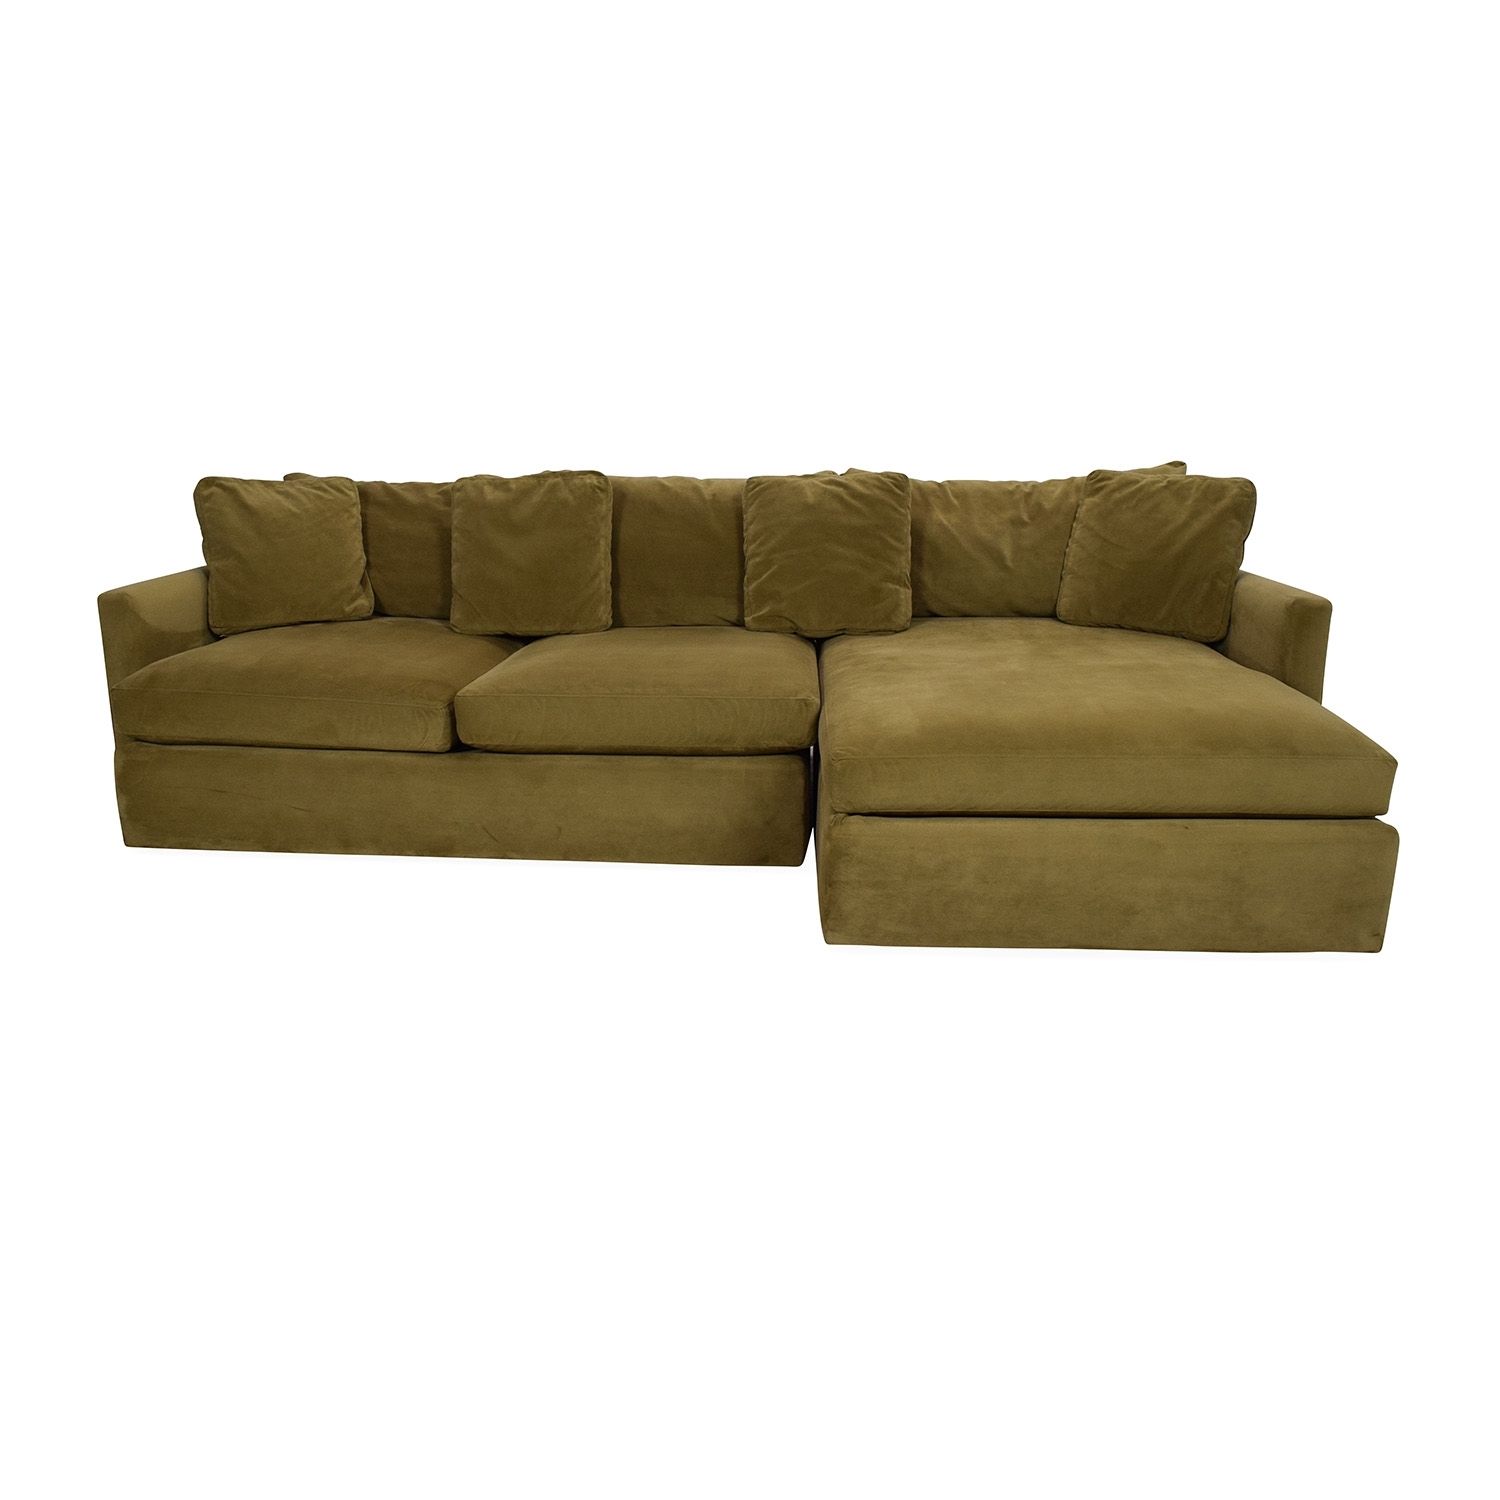 65% Off – Crate And Barrel Crate And Barrel Lounge Ii Sectional Sofa Pertaining To On Sale Sectional Sofas (Photo 8 of 10)